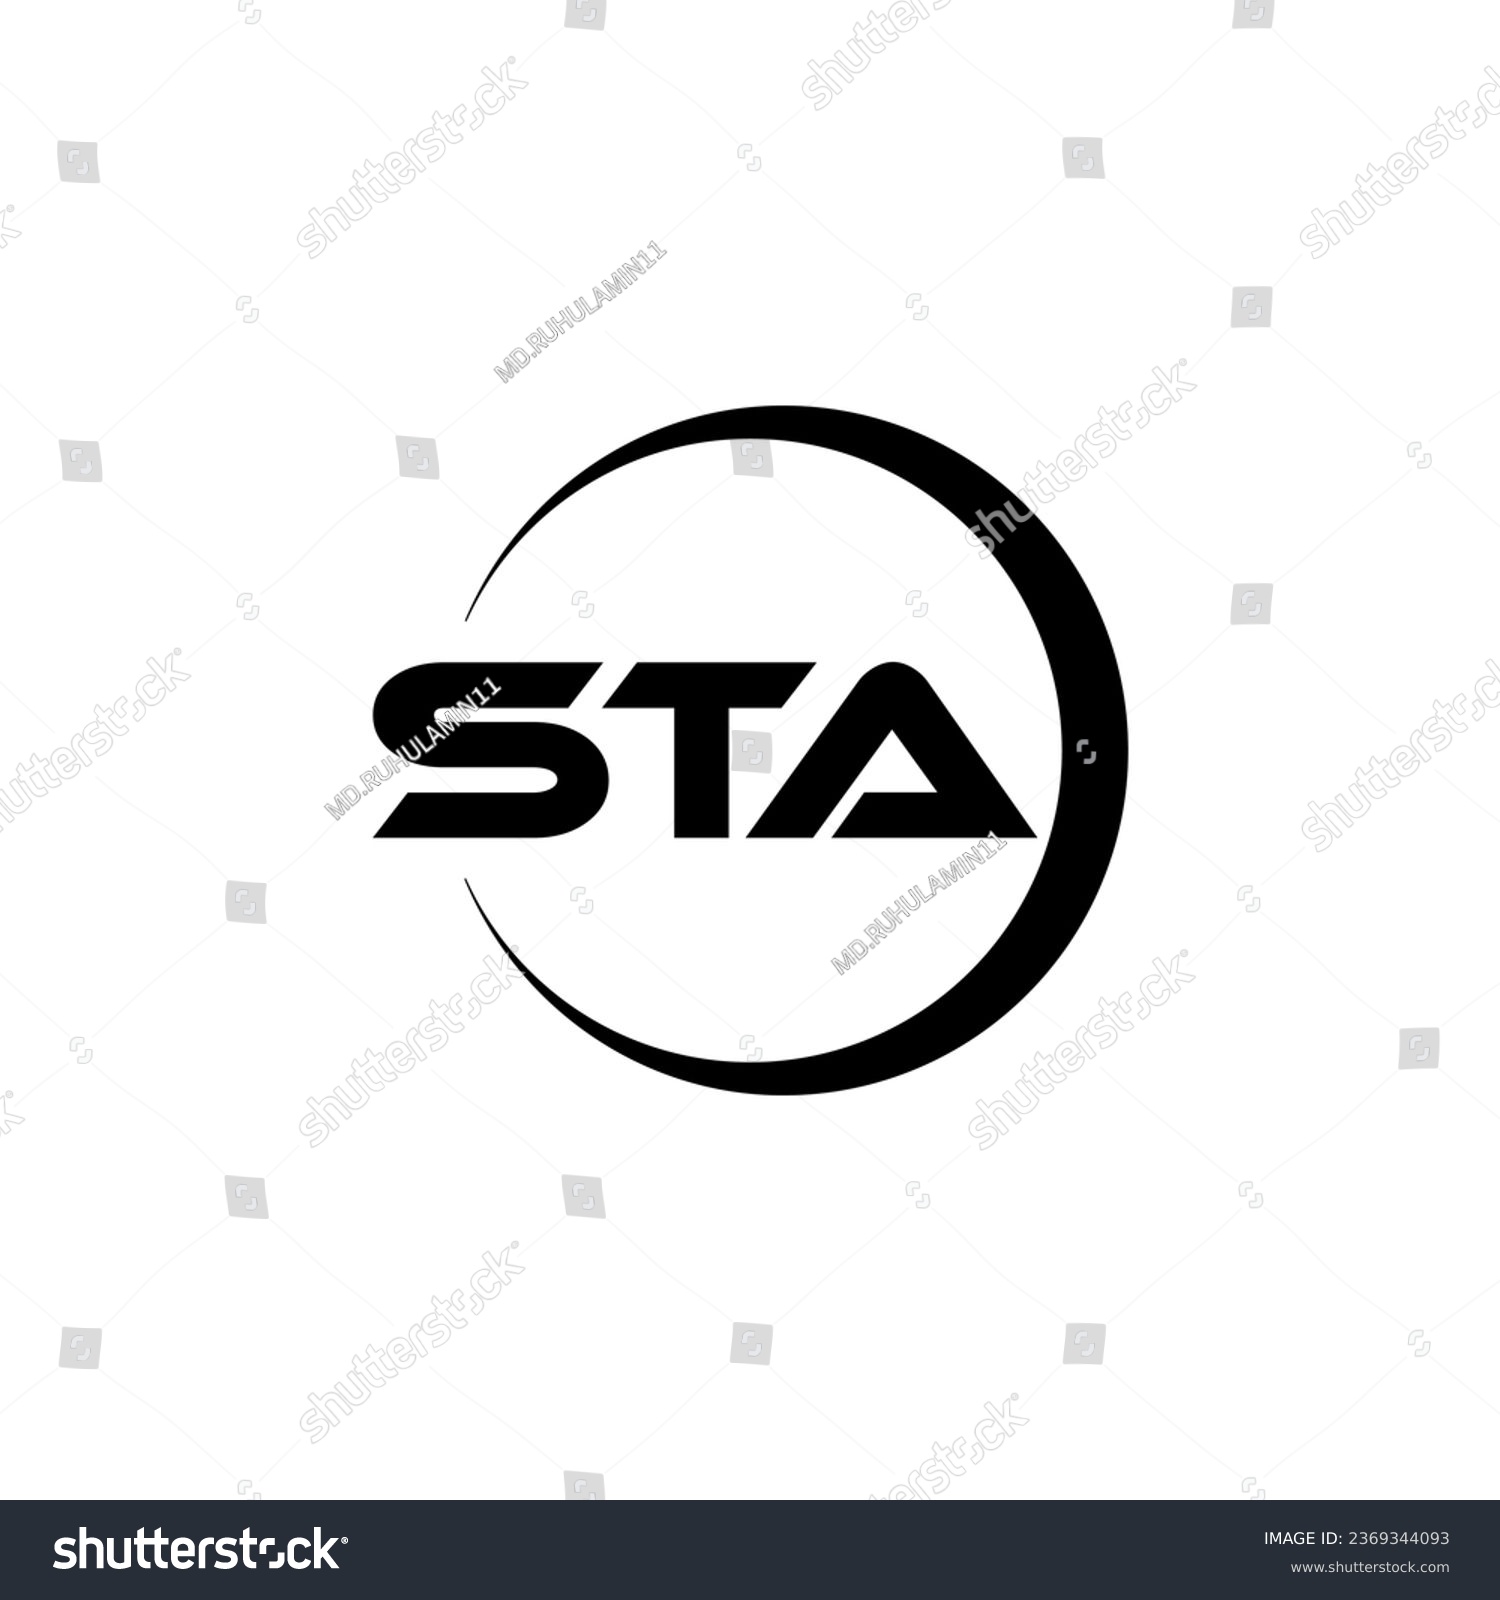 STA Letter Logo Design, Inspiration for a Unique Identity. Modern Elegance and Creative Design. Watermark Your Success with the Striking this Logo. #2369344093